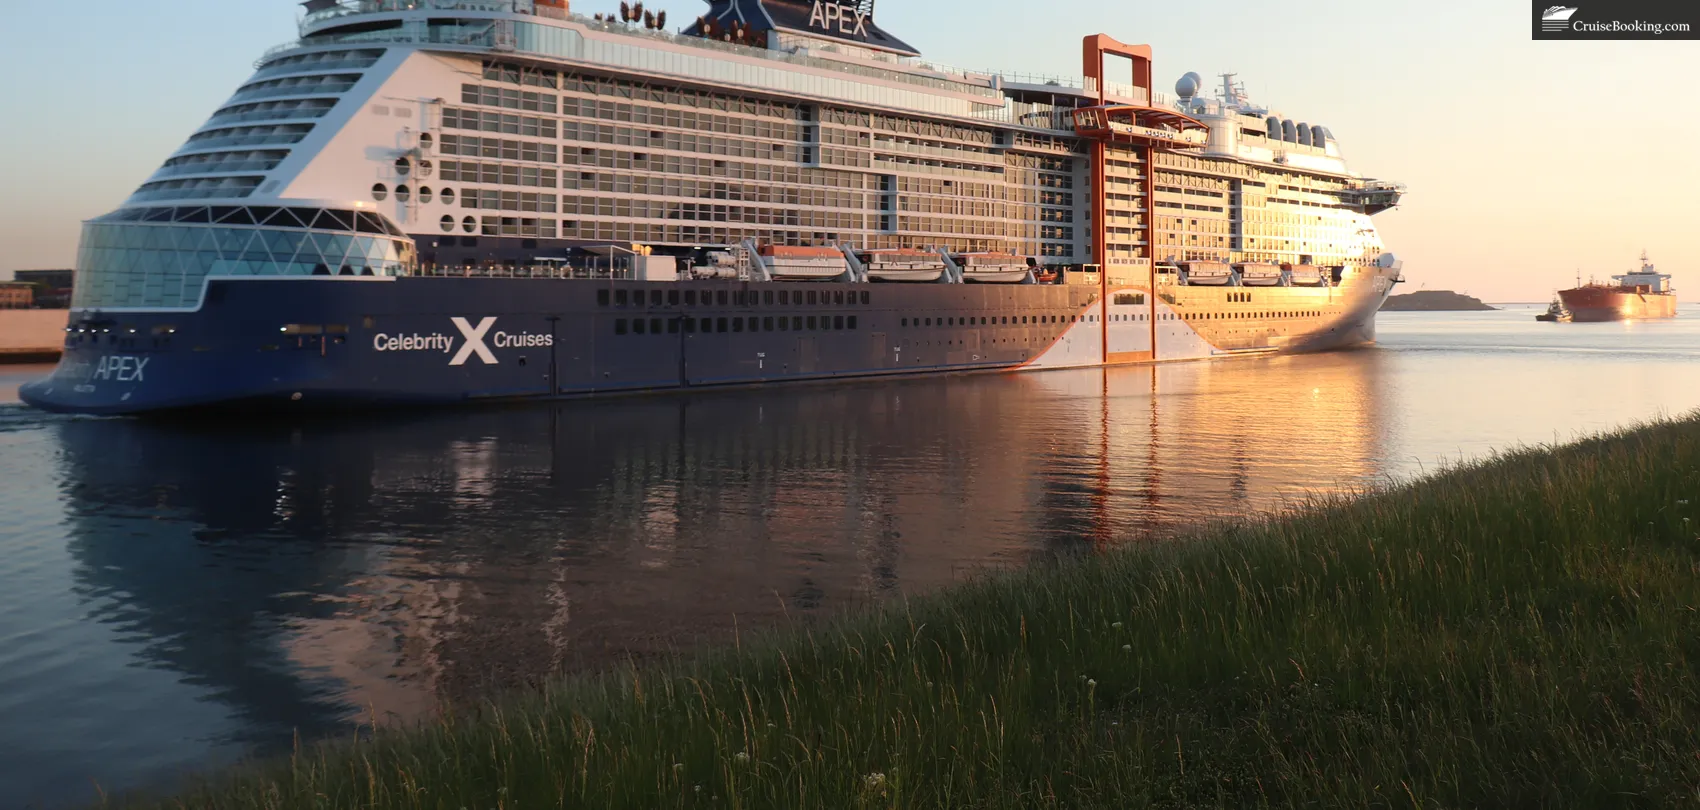 Celebrity Apex Sailings Cancelled to Accommodate Drydock